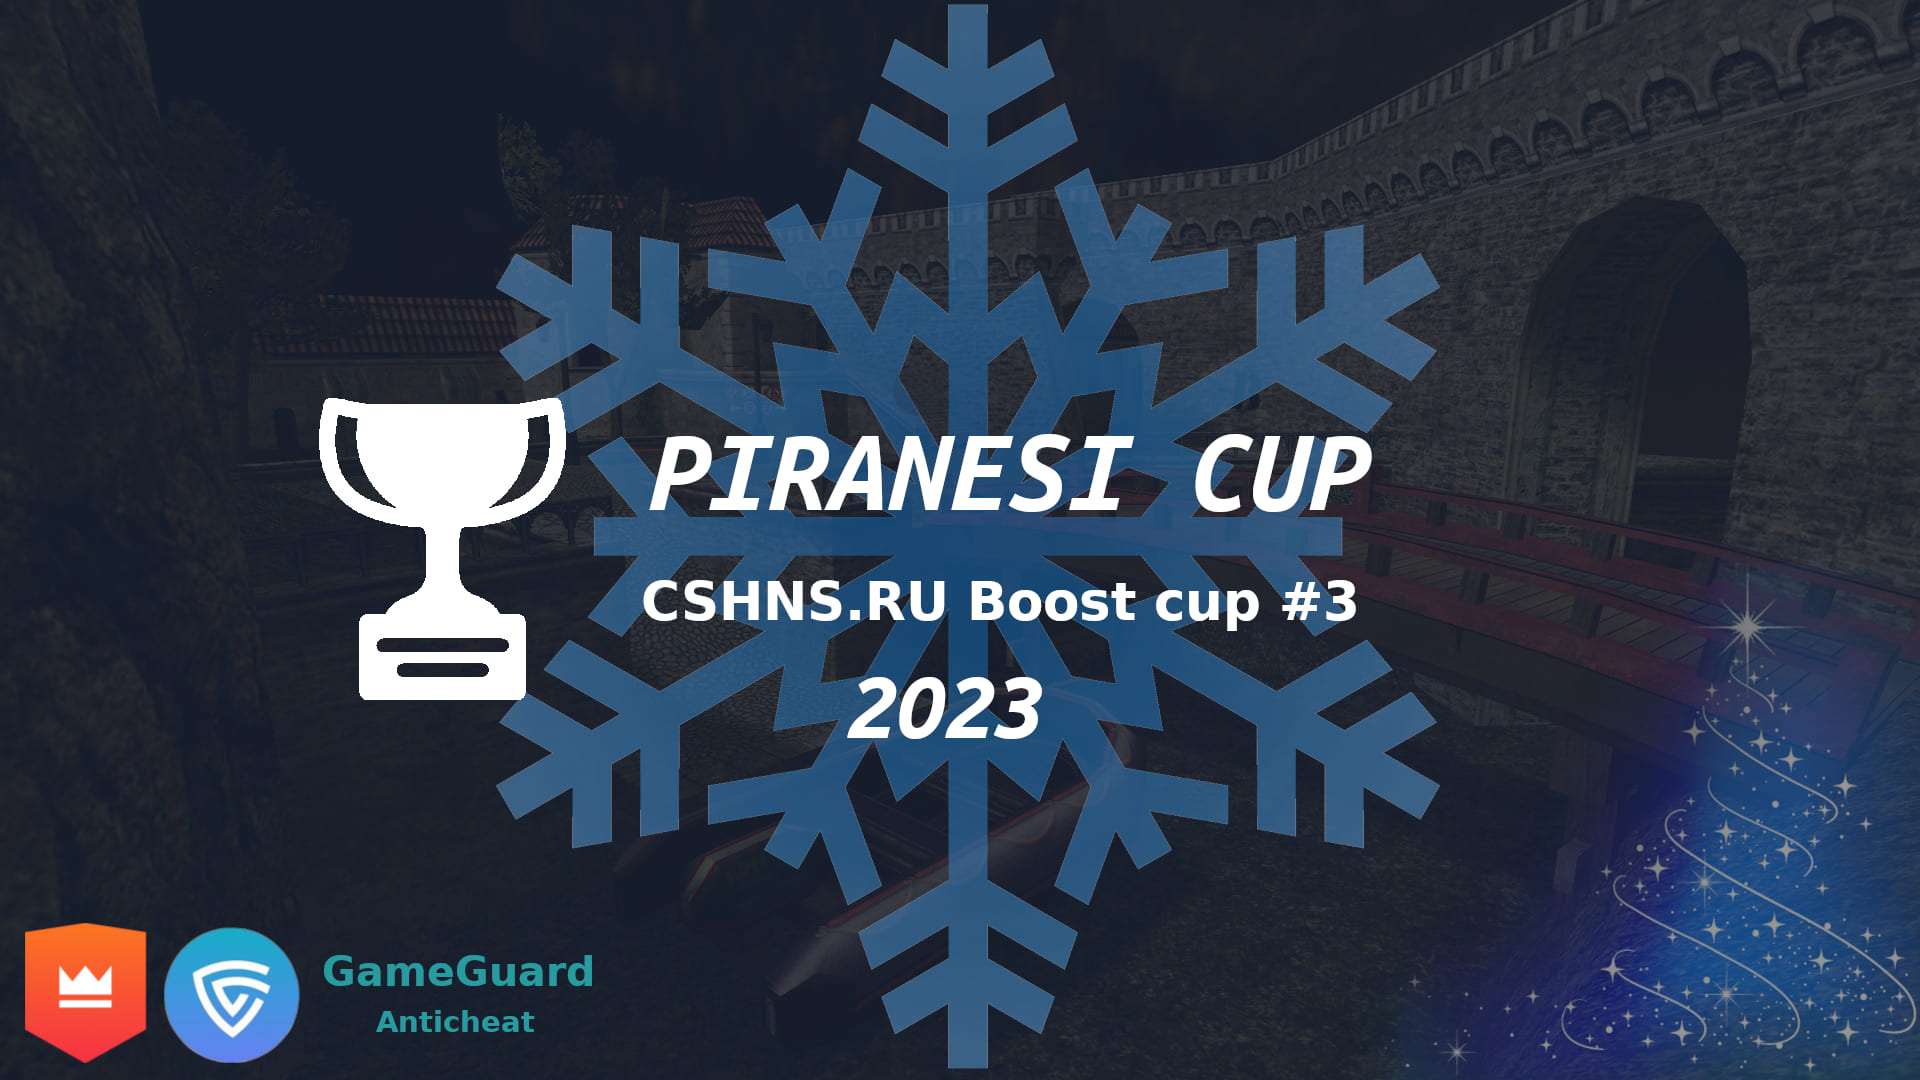 Piranesi cup | HNS Boost cup #3 5x5